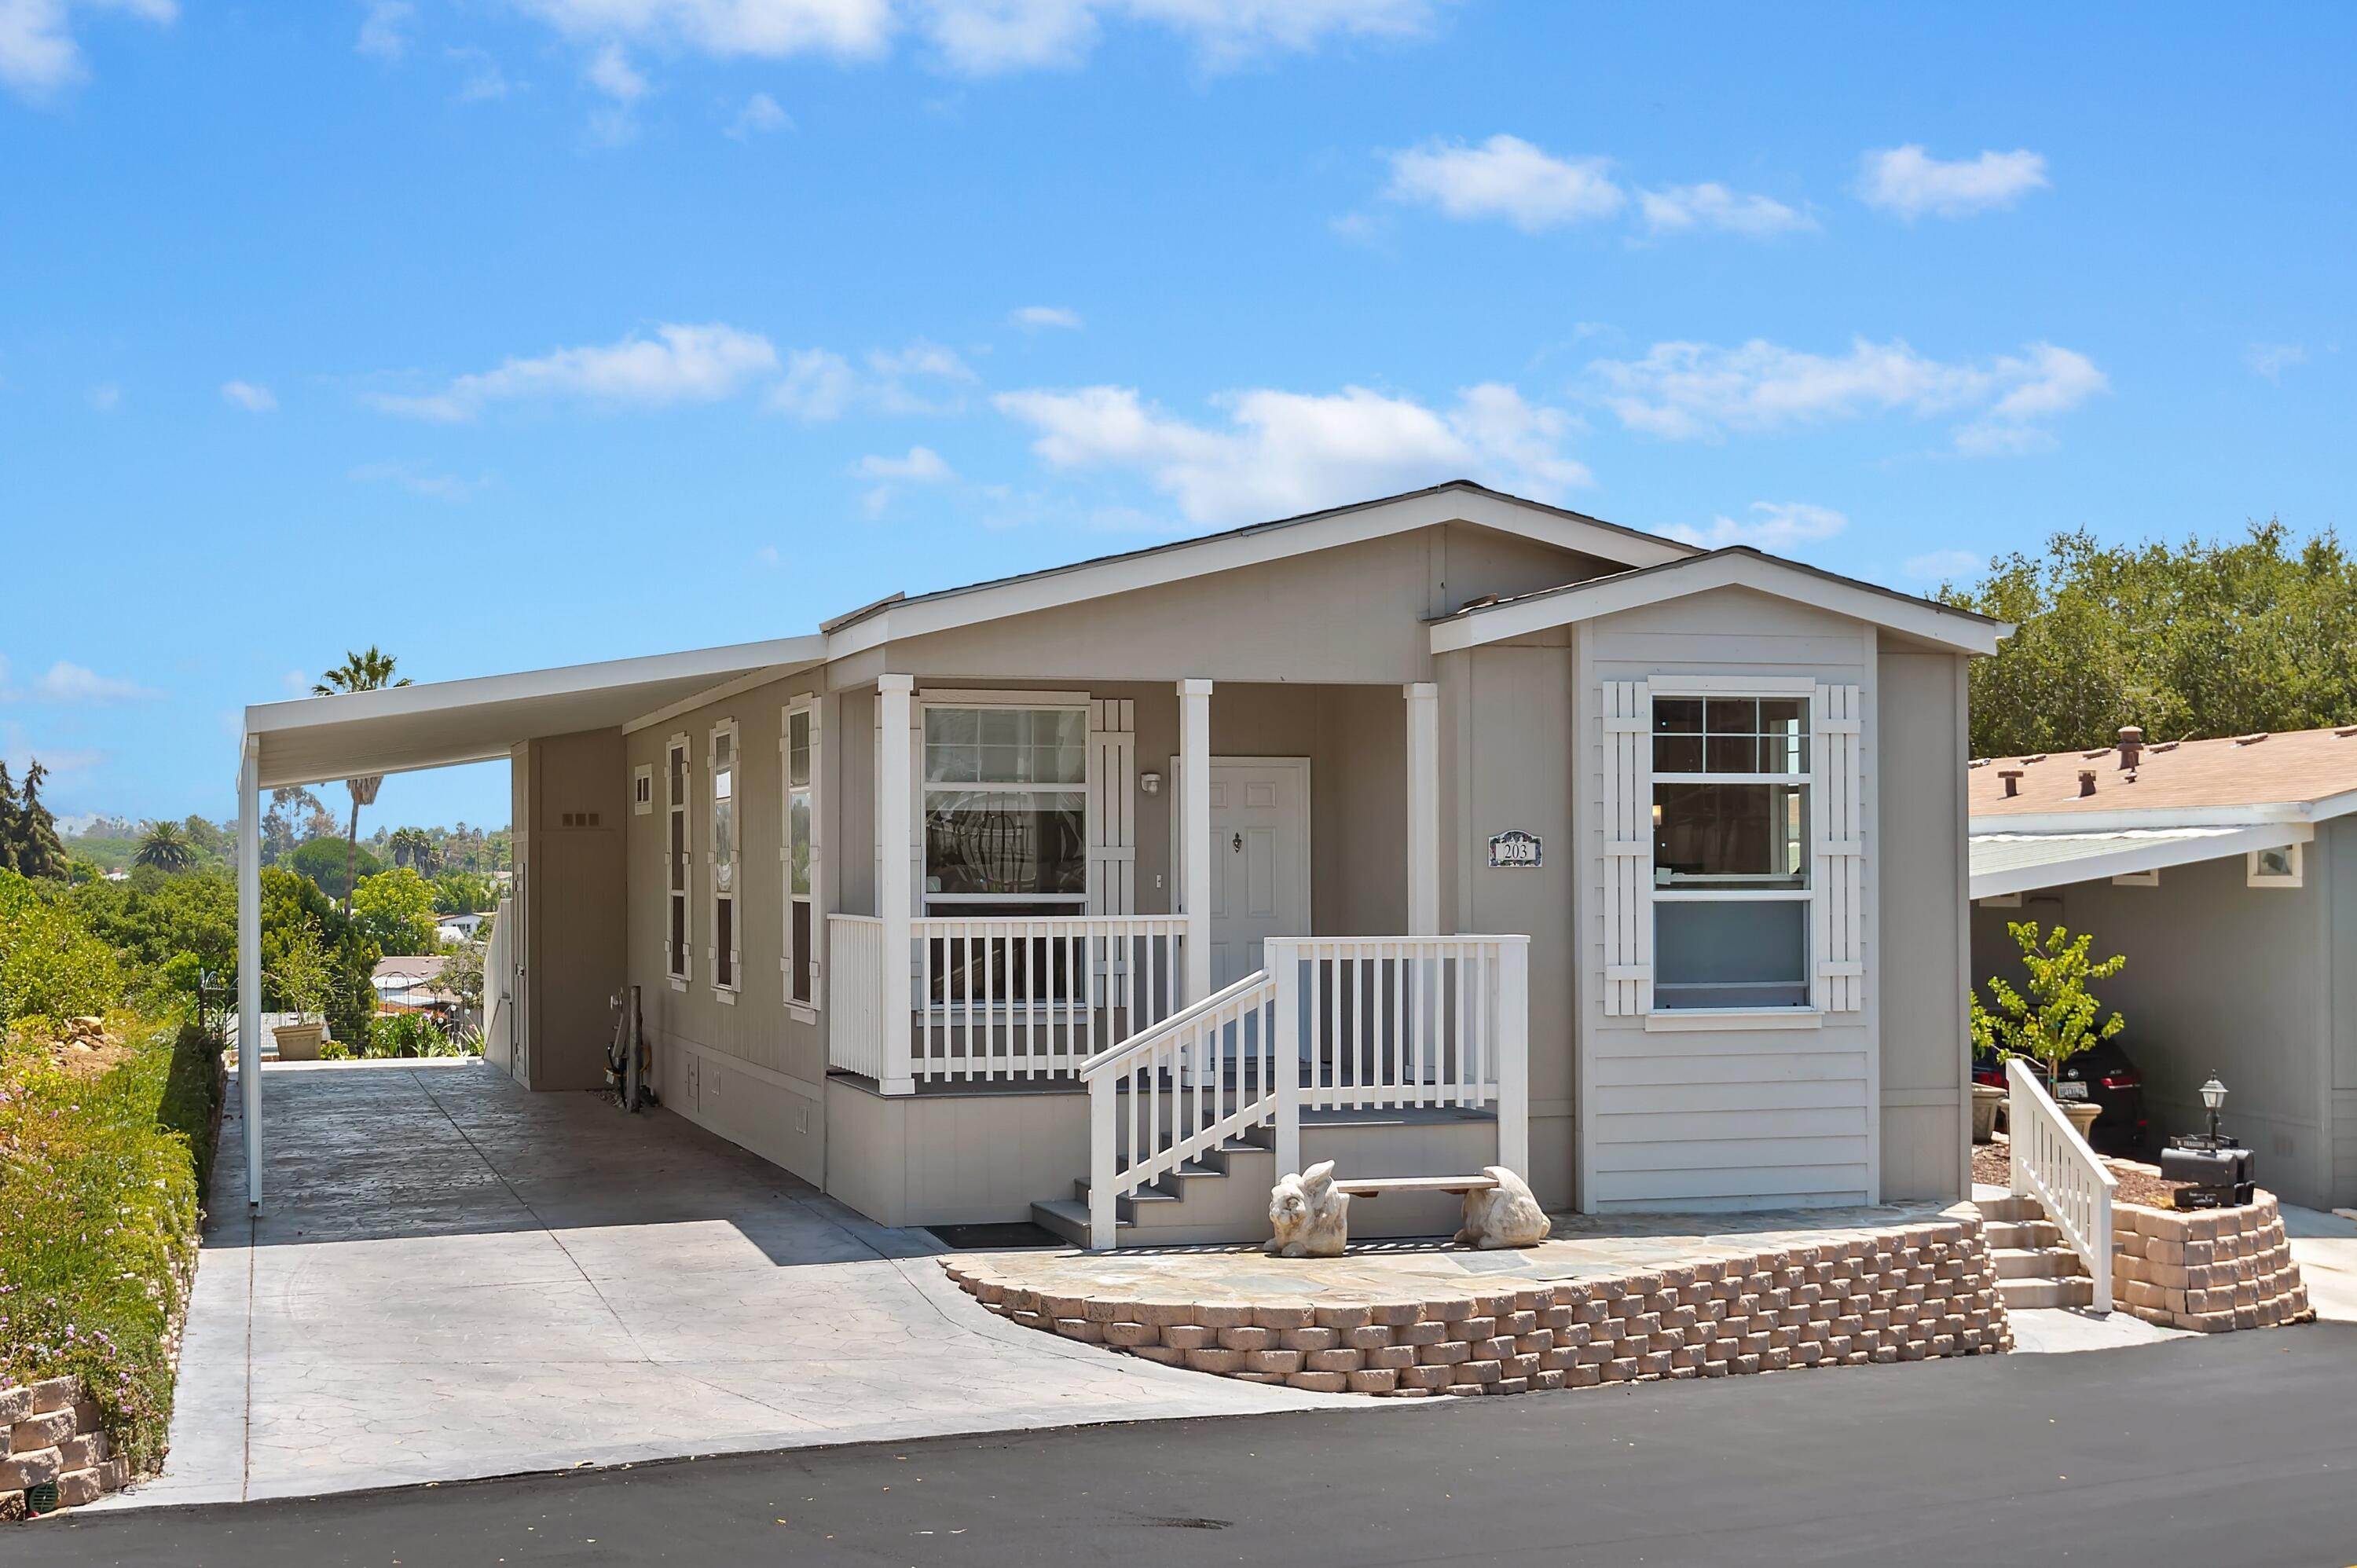 Manufactured Housing for Sale at 333 Old Mill Road Santa Barbara, California 93110 United States